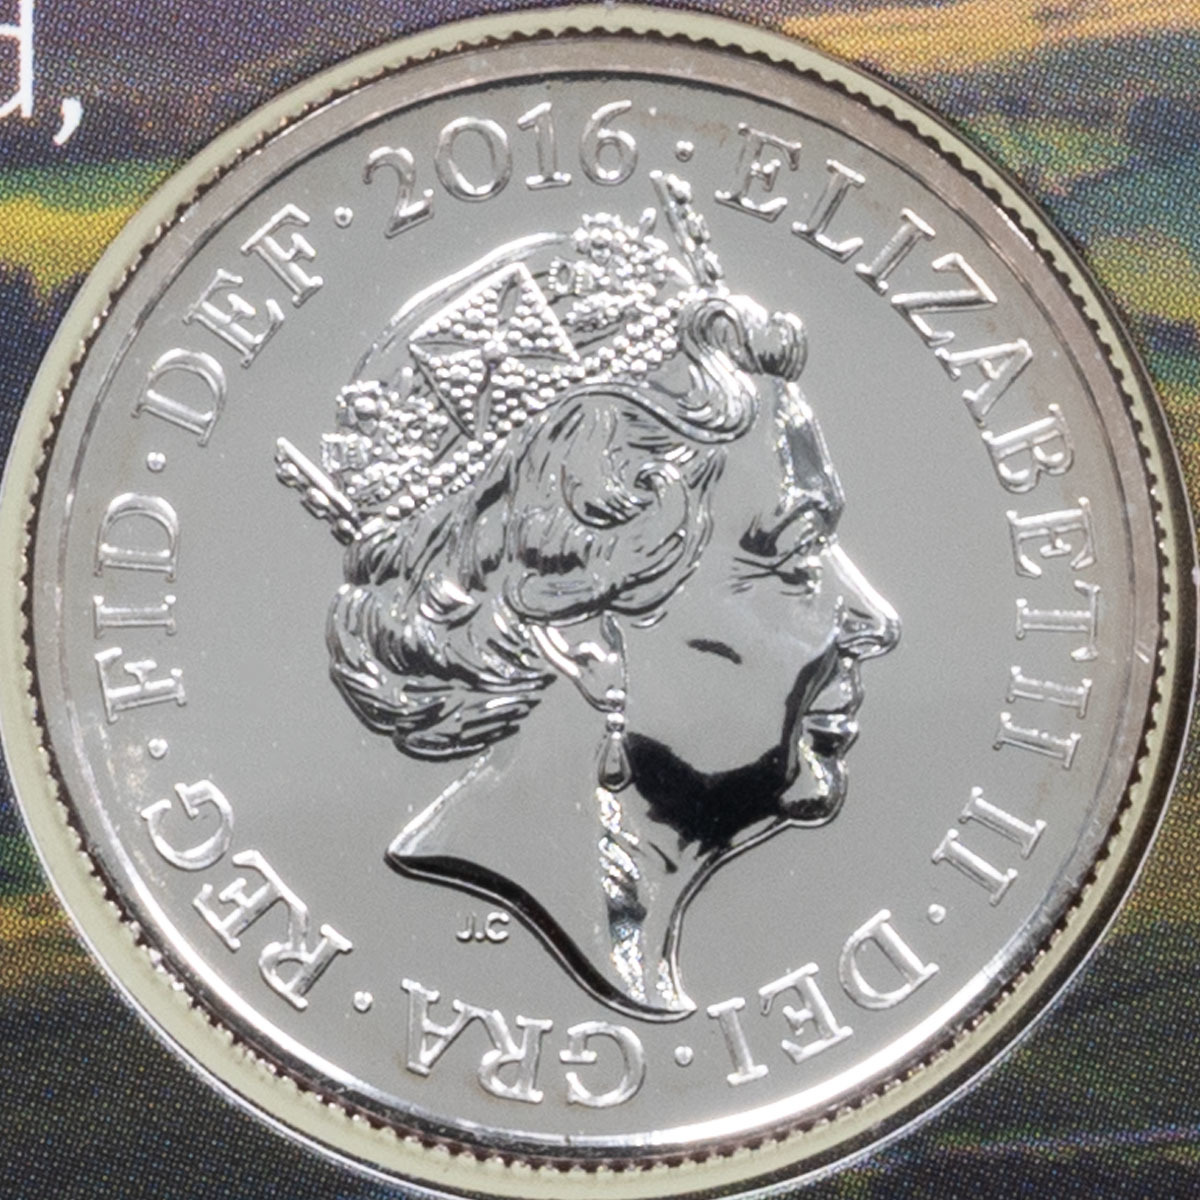 UK16WF20 2016 Welsh Dragon Pride Of Wales Twenty Pound Silver Brilliant Uncirculated Coin In Folder Obverse